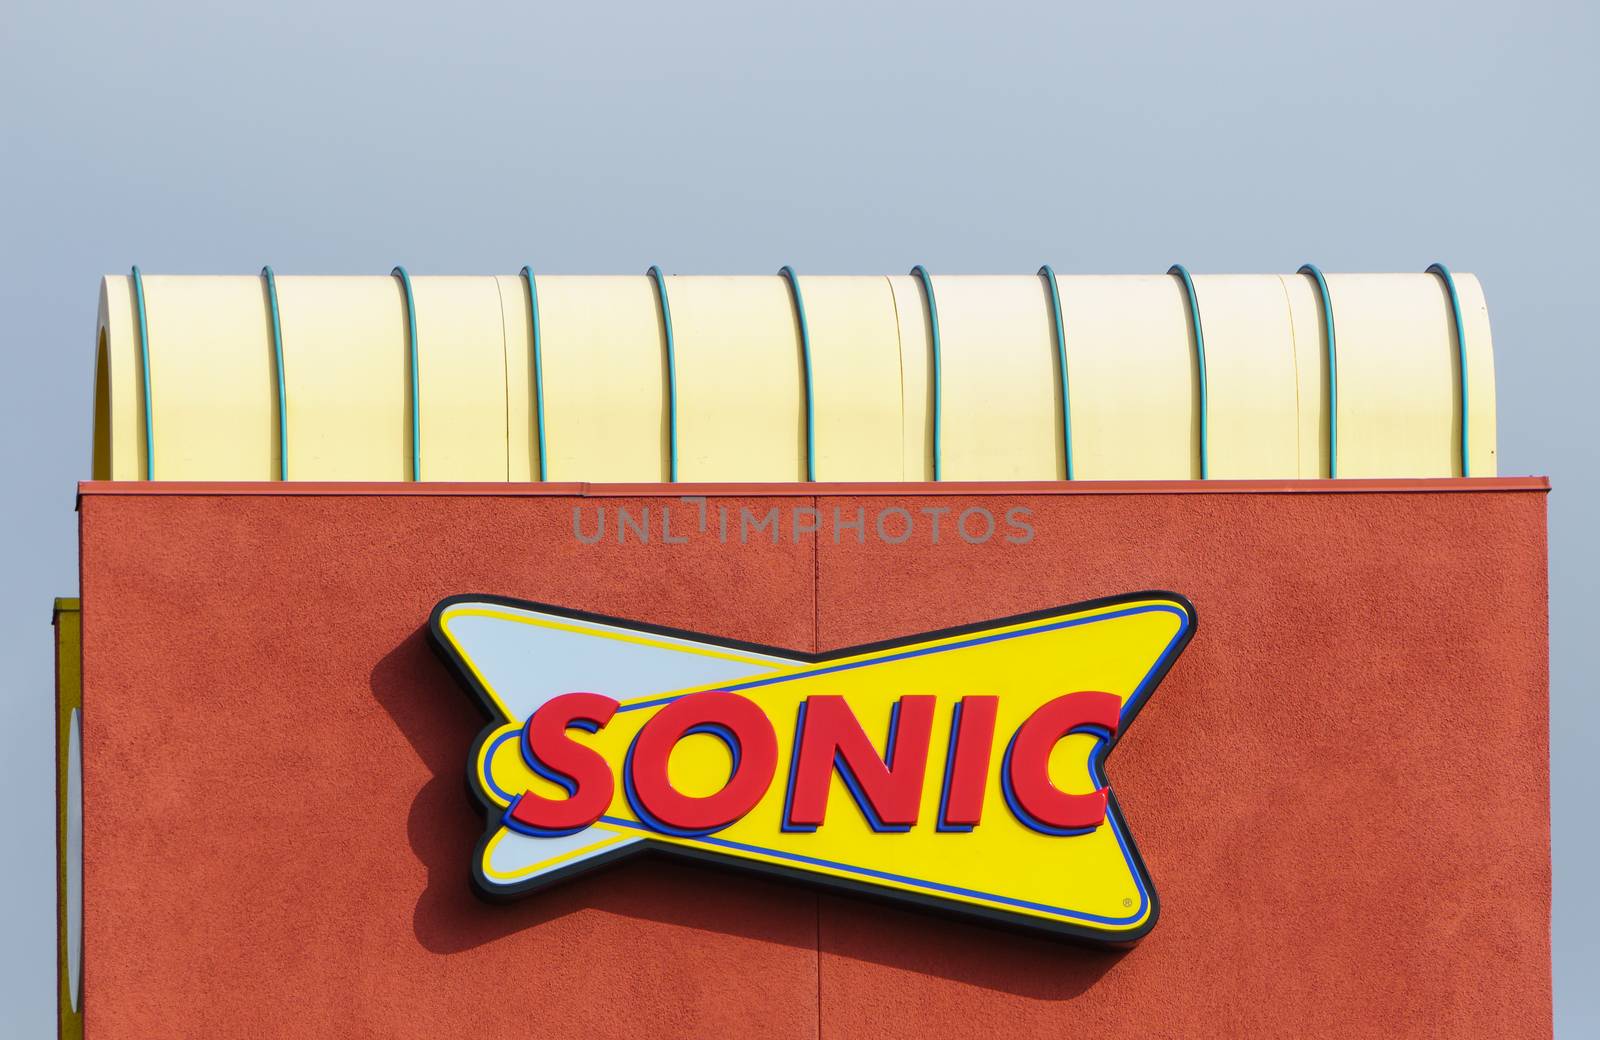 Sonic Drive-In Restaurant by wolterk